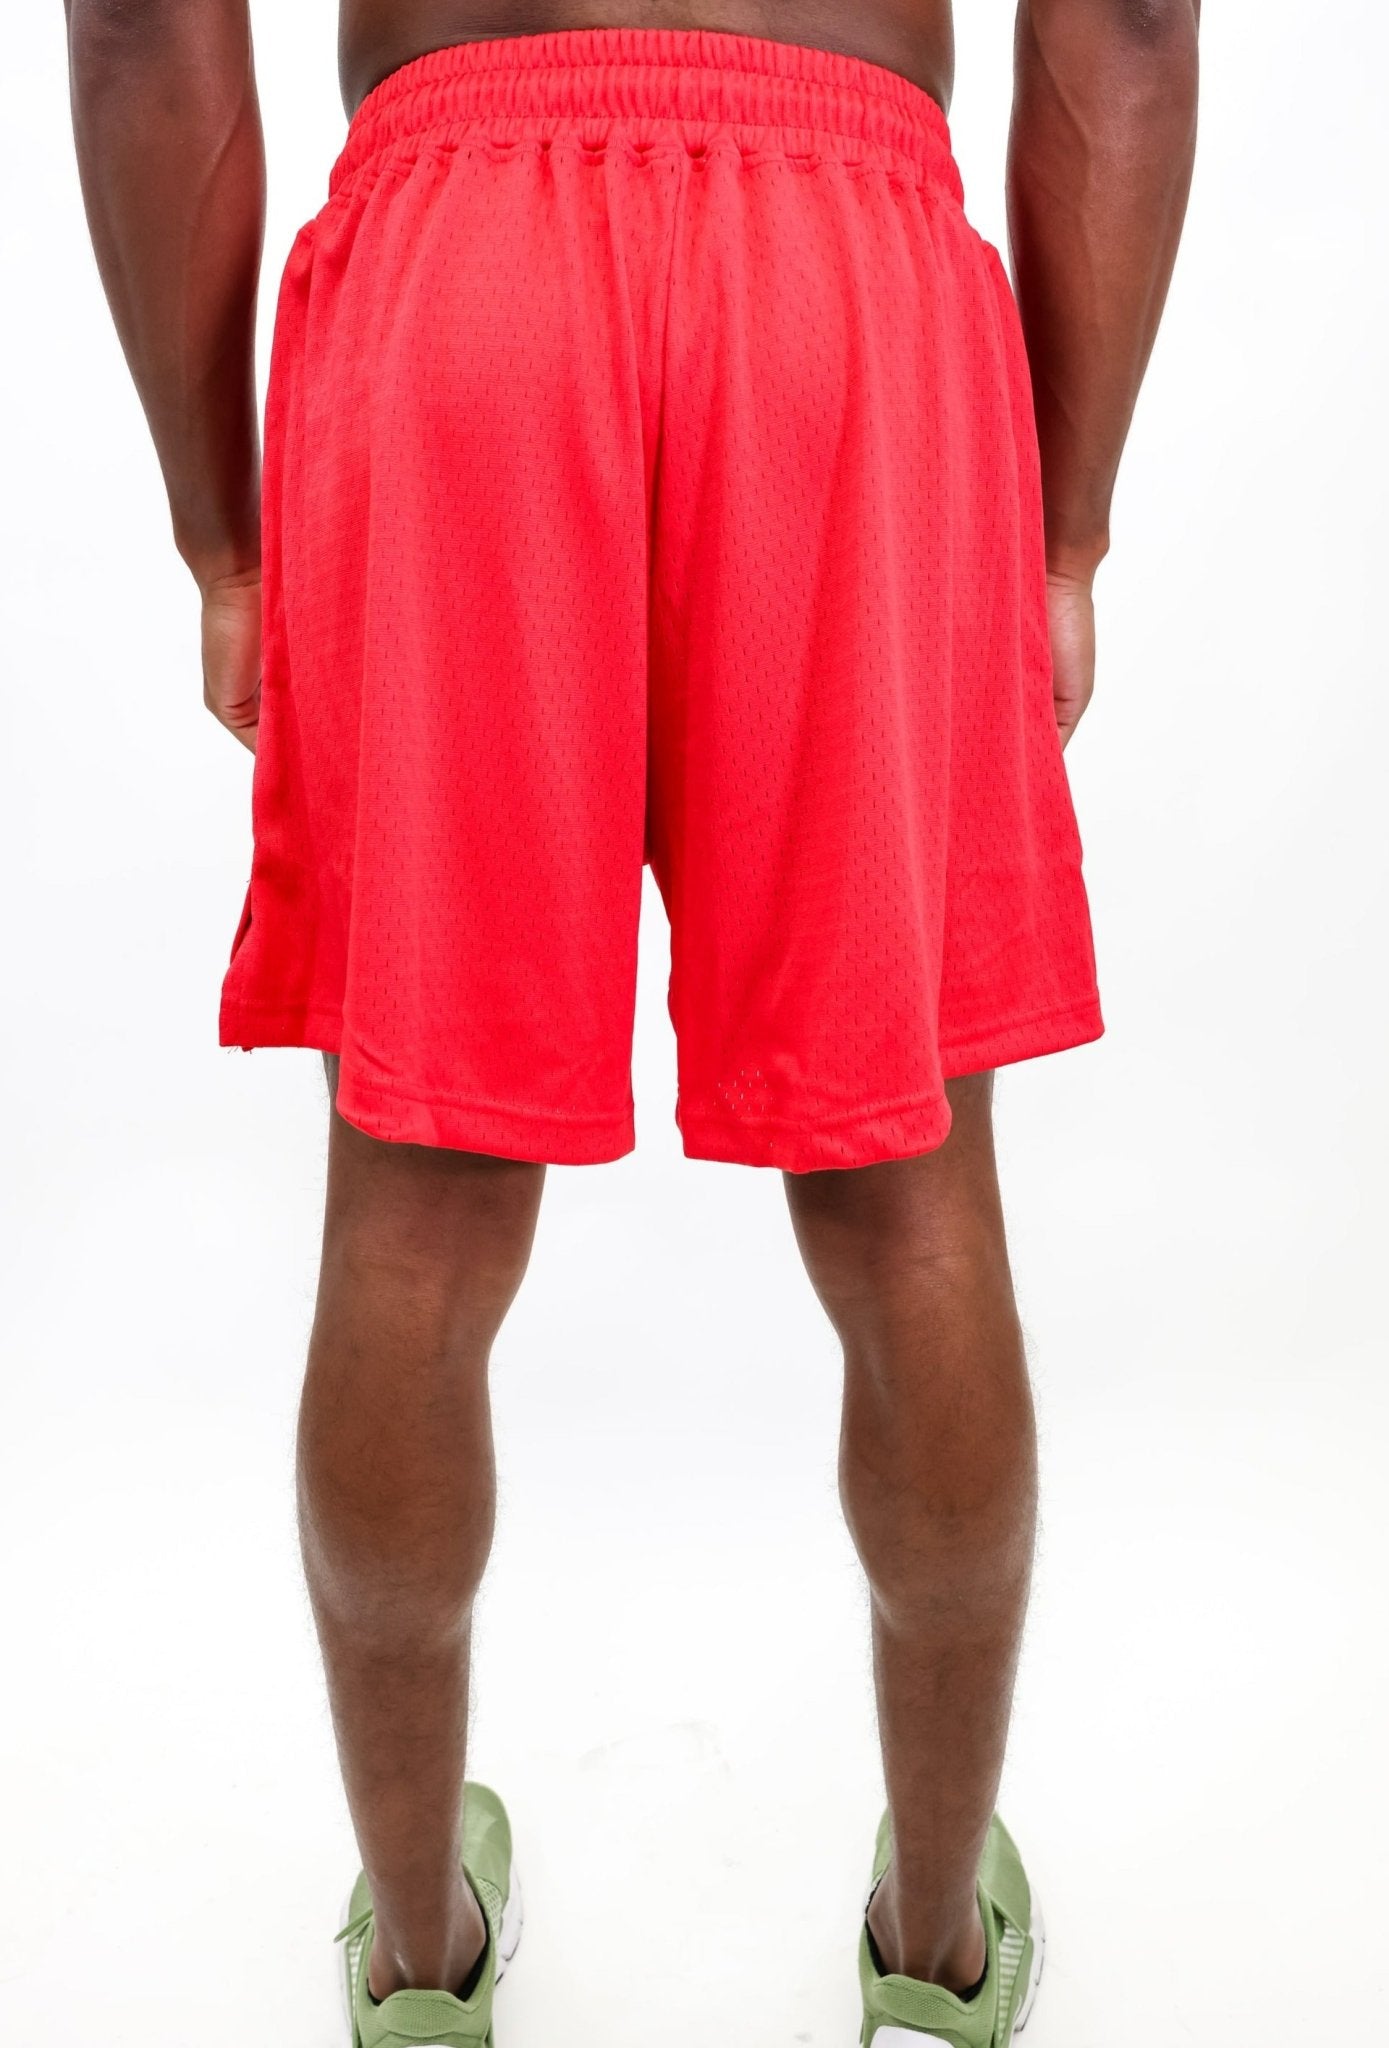 WBS 6" MESH SHORTS [RED] - We Ball Sports